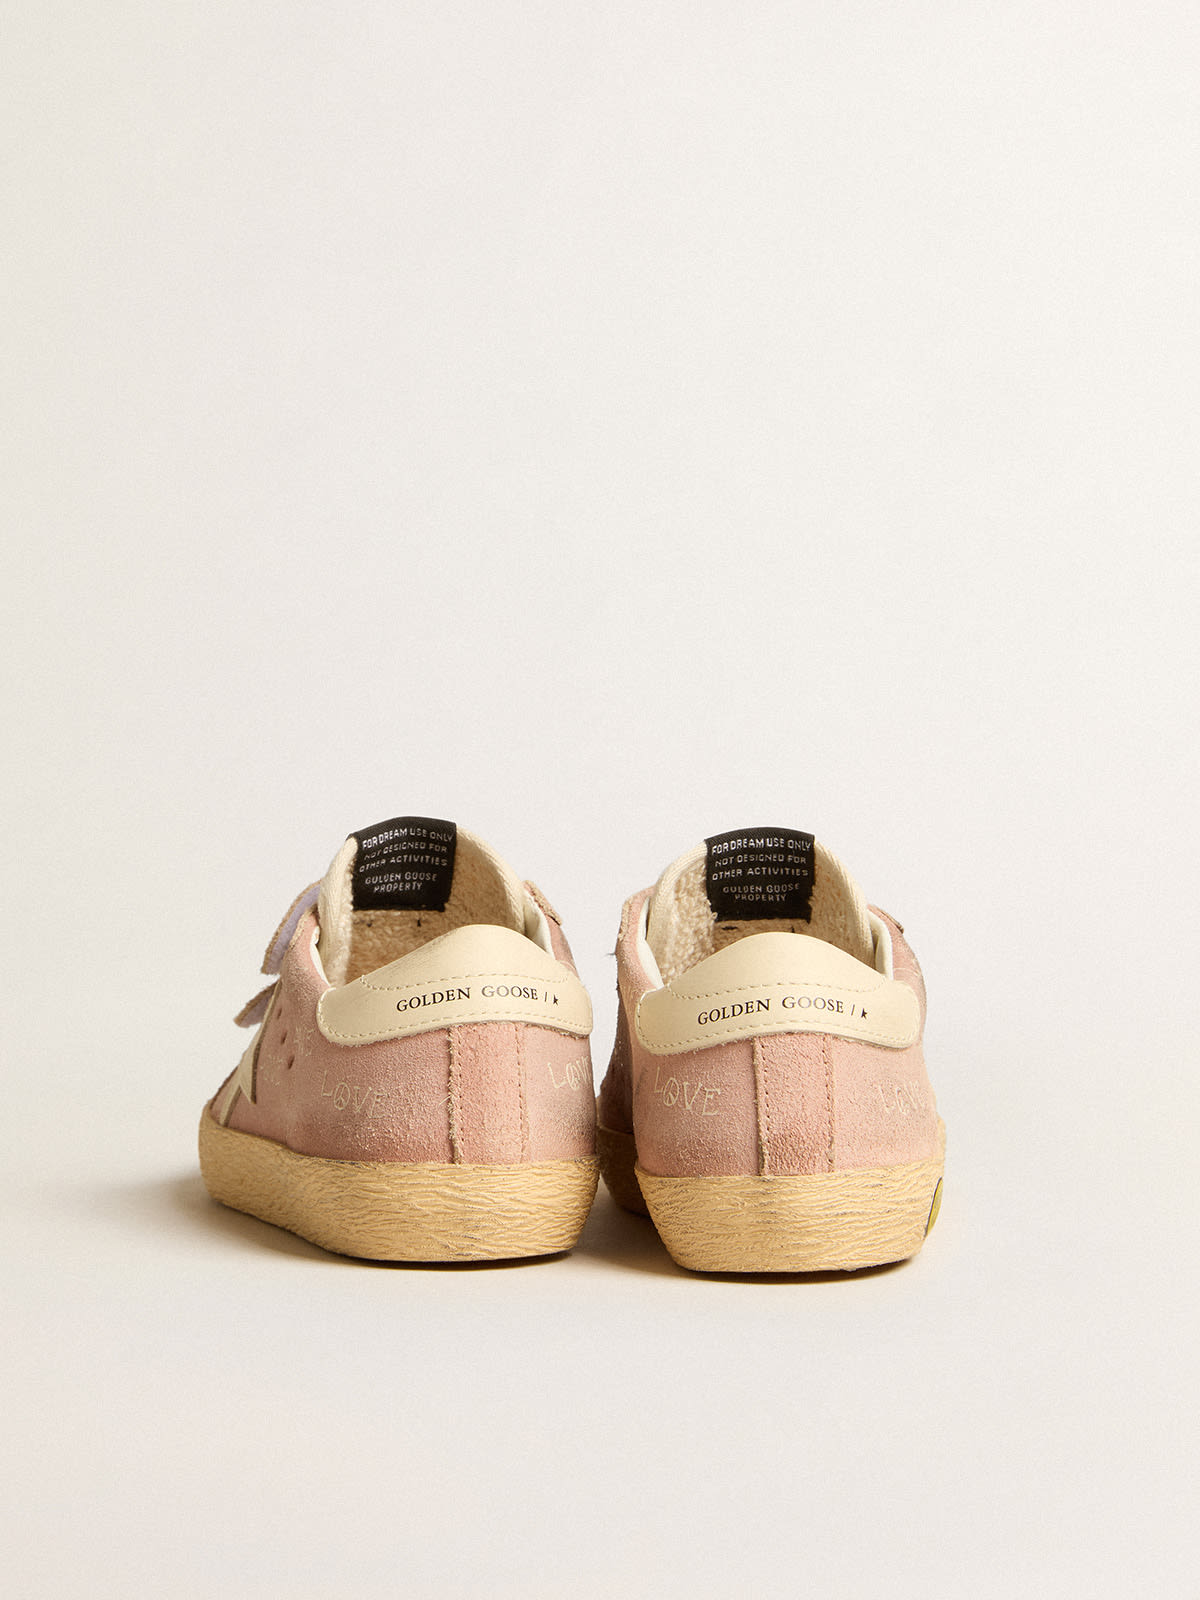 Old School Junior in pink suede with cream leather star and heel tab ...